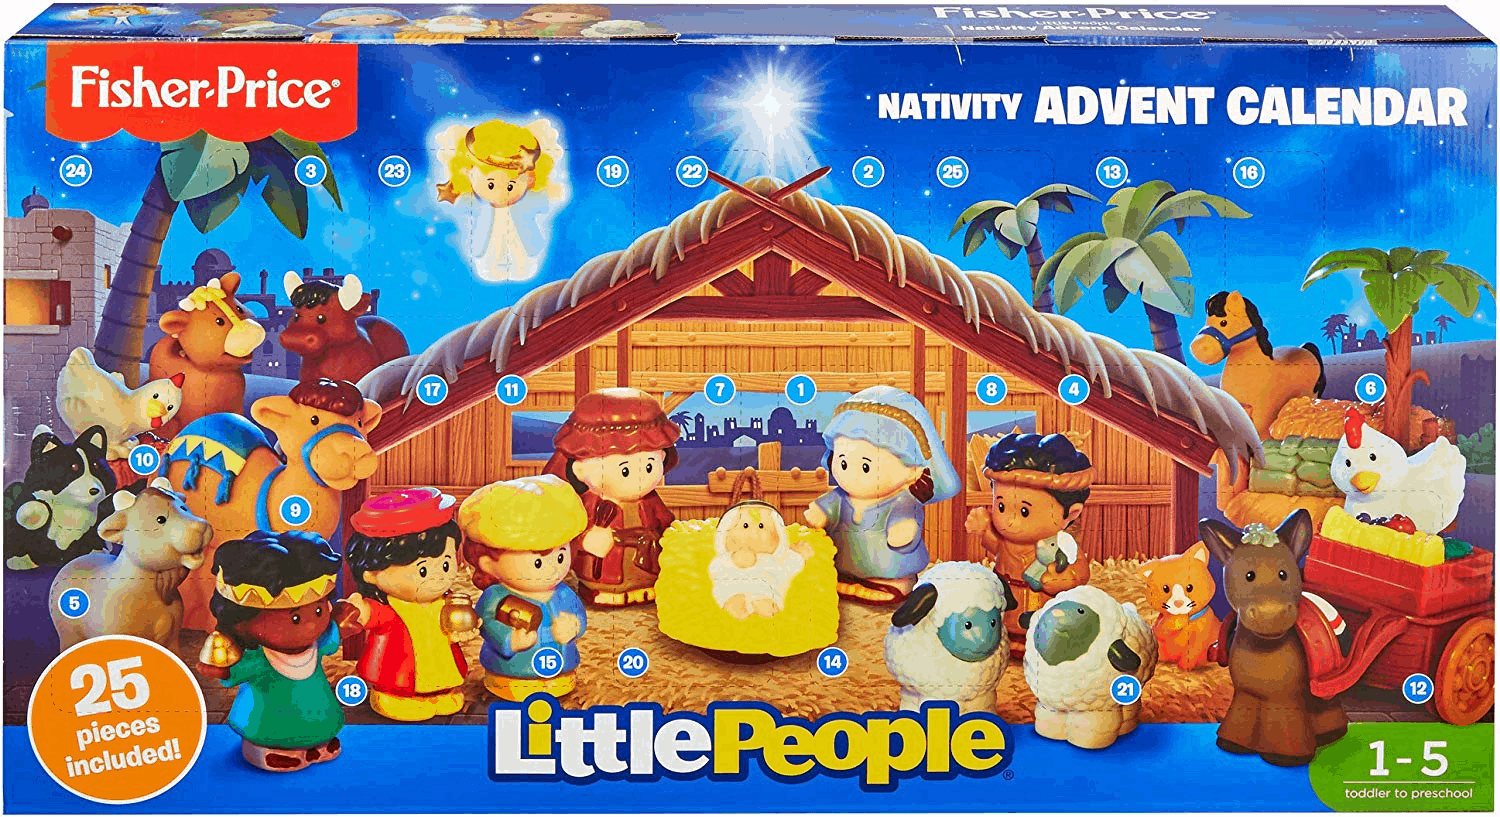 Little People Nativity Advent Calendar 24.99 TODAY ONLY